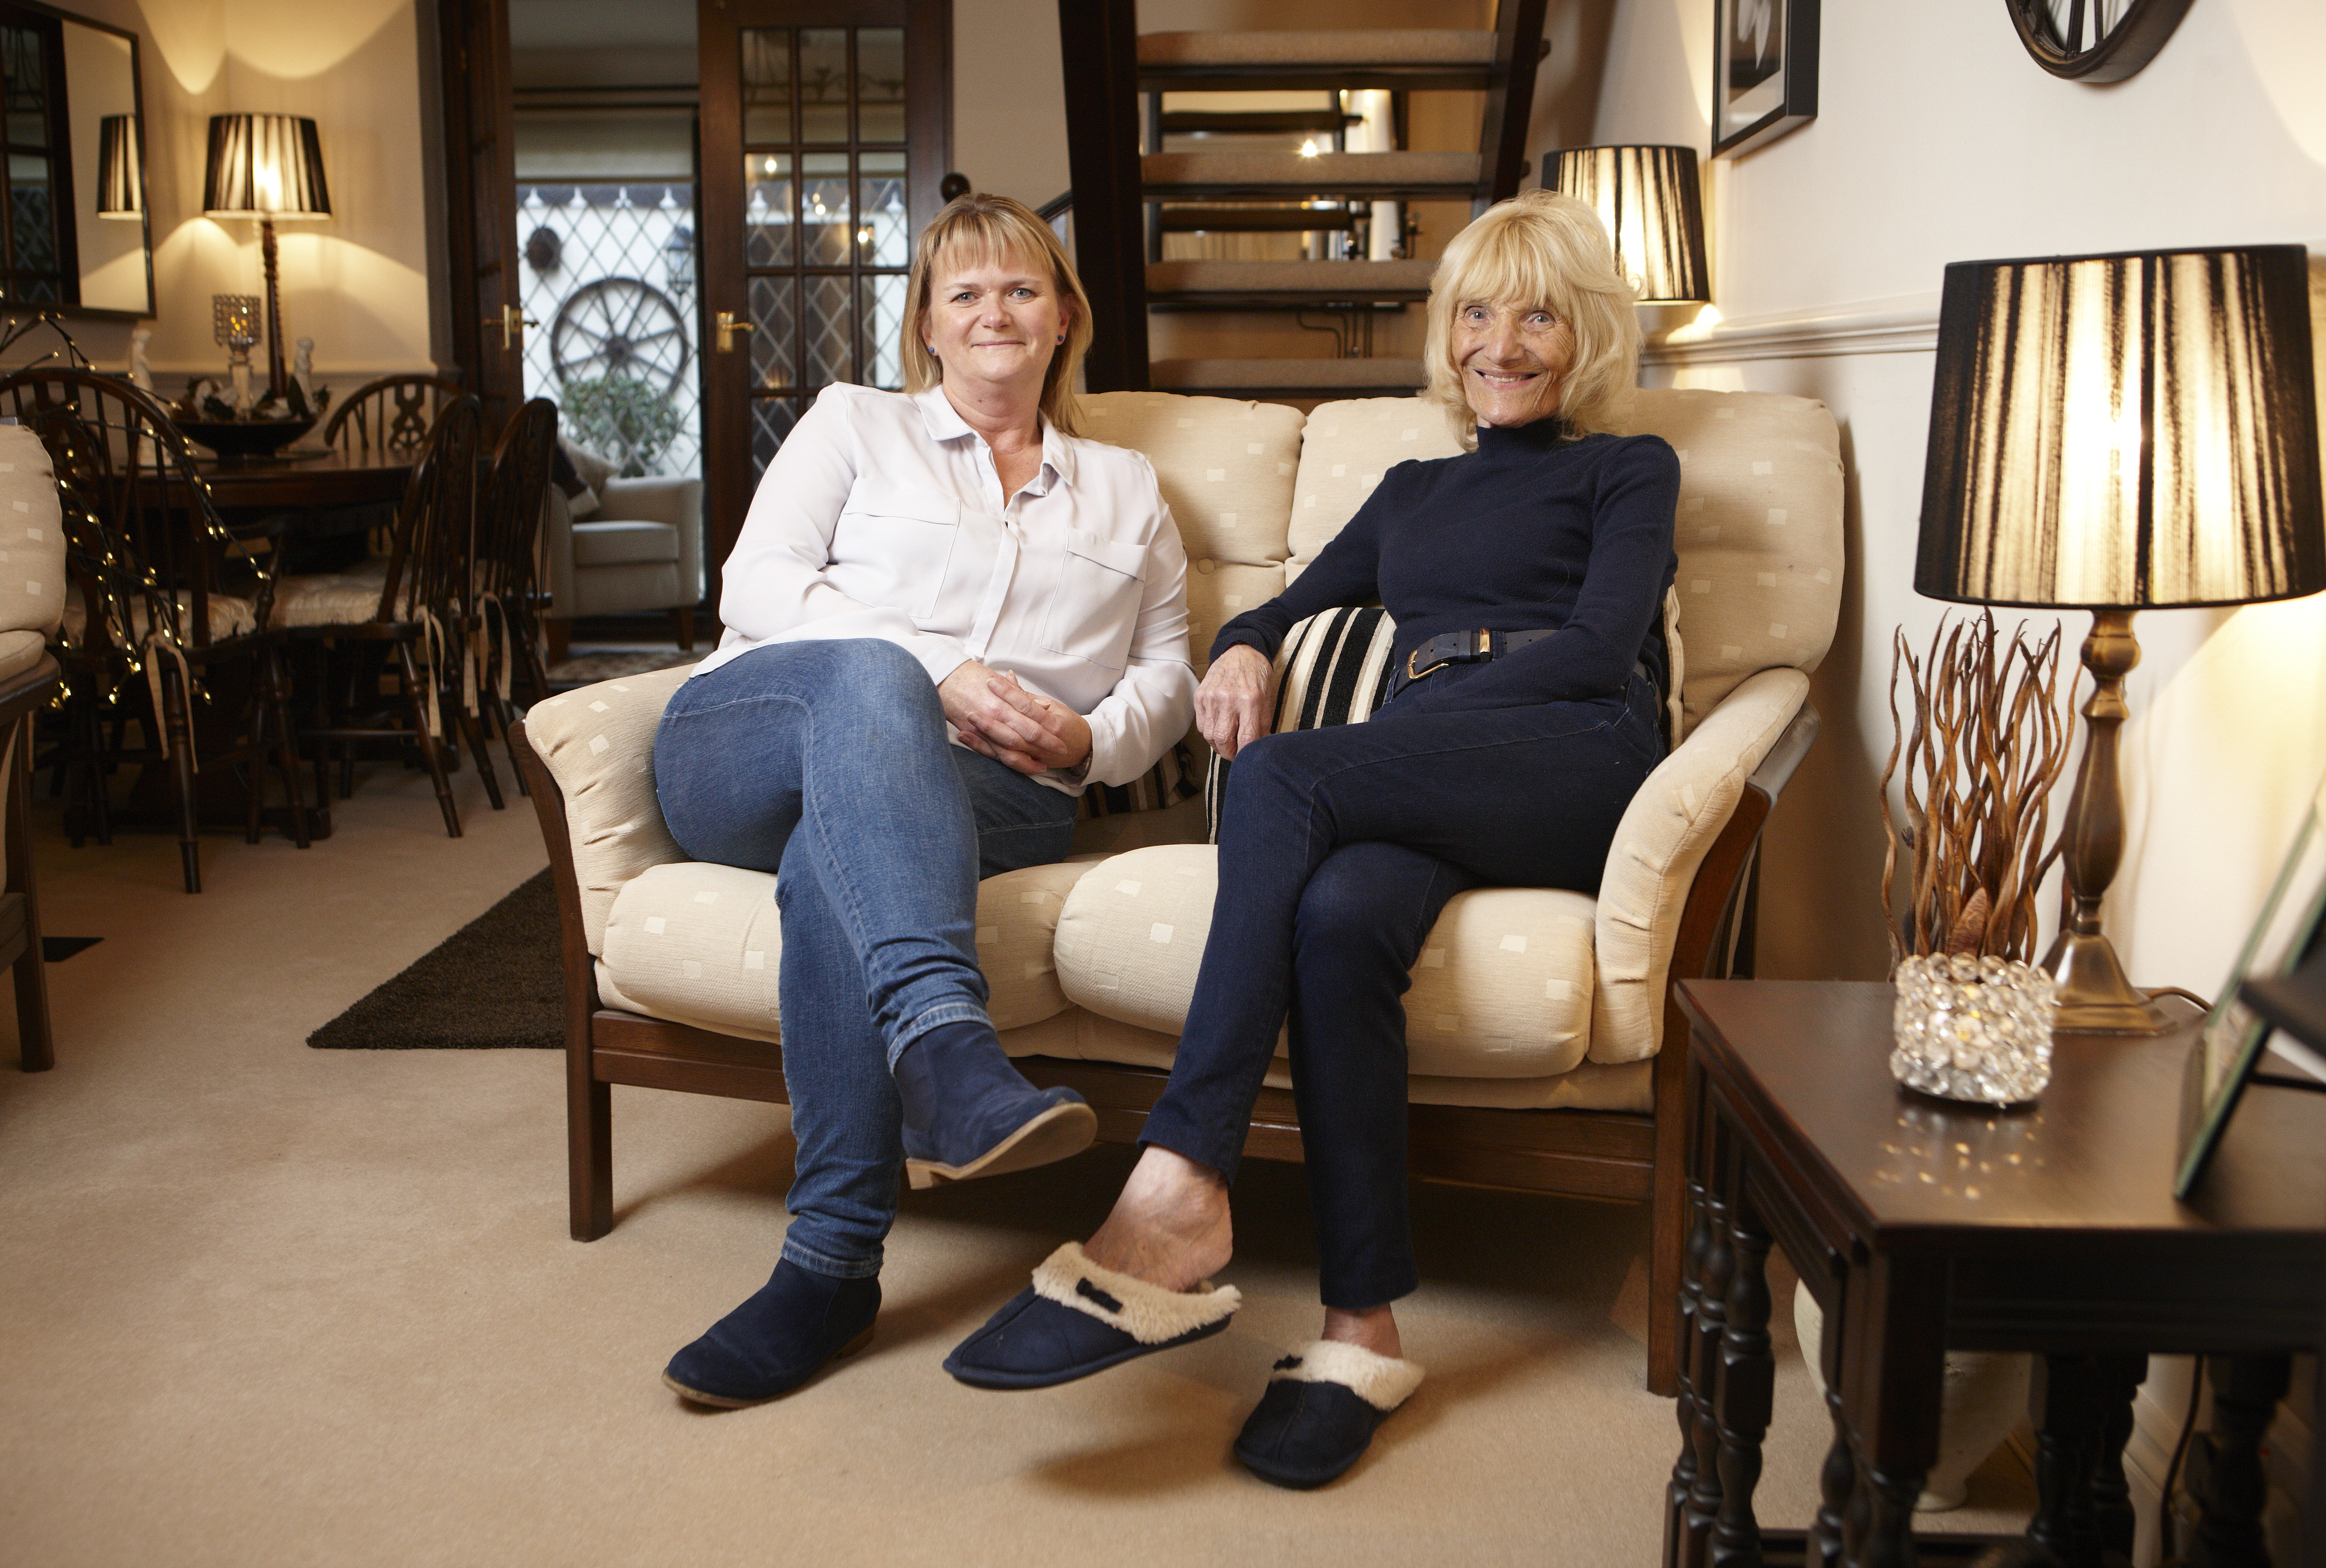 Pat, whose husband died of mesothelioma contracted at work, with her daughter in her living room